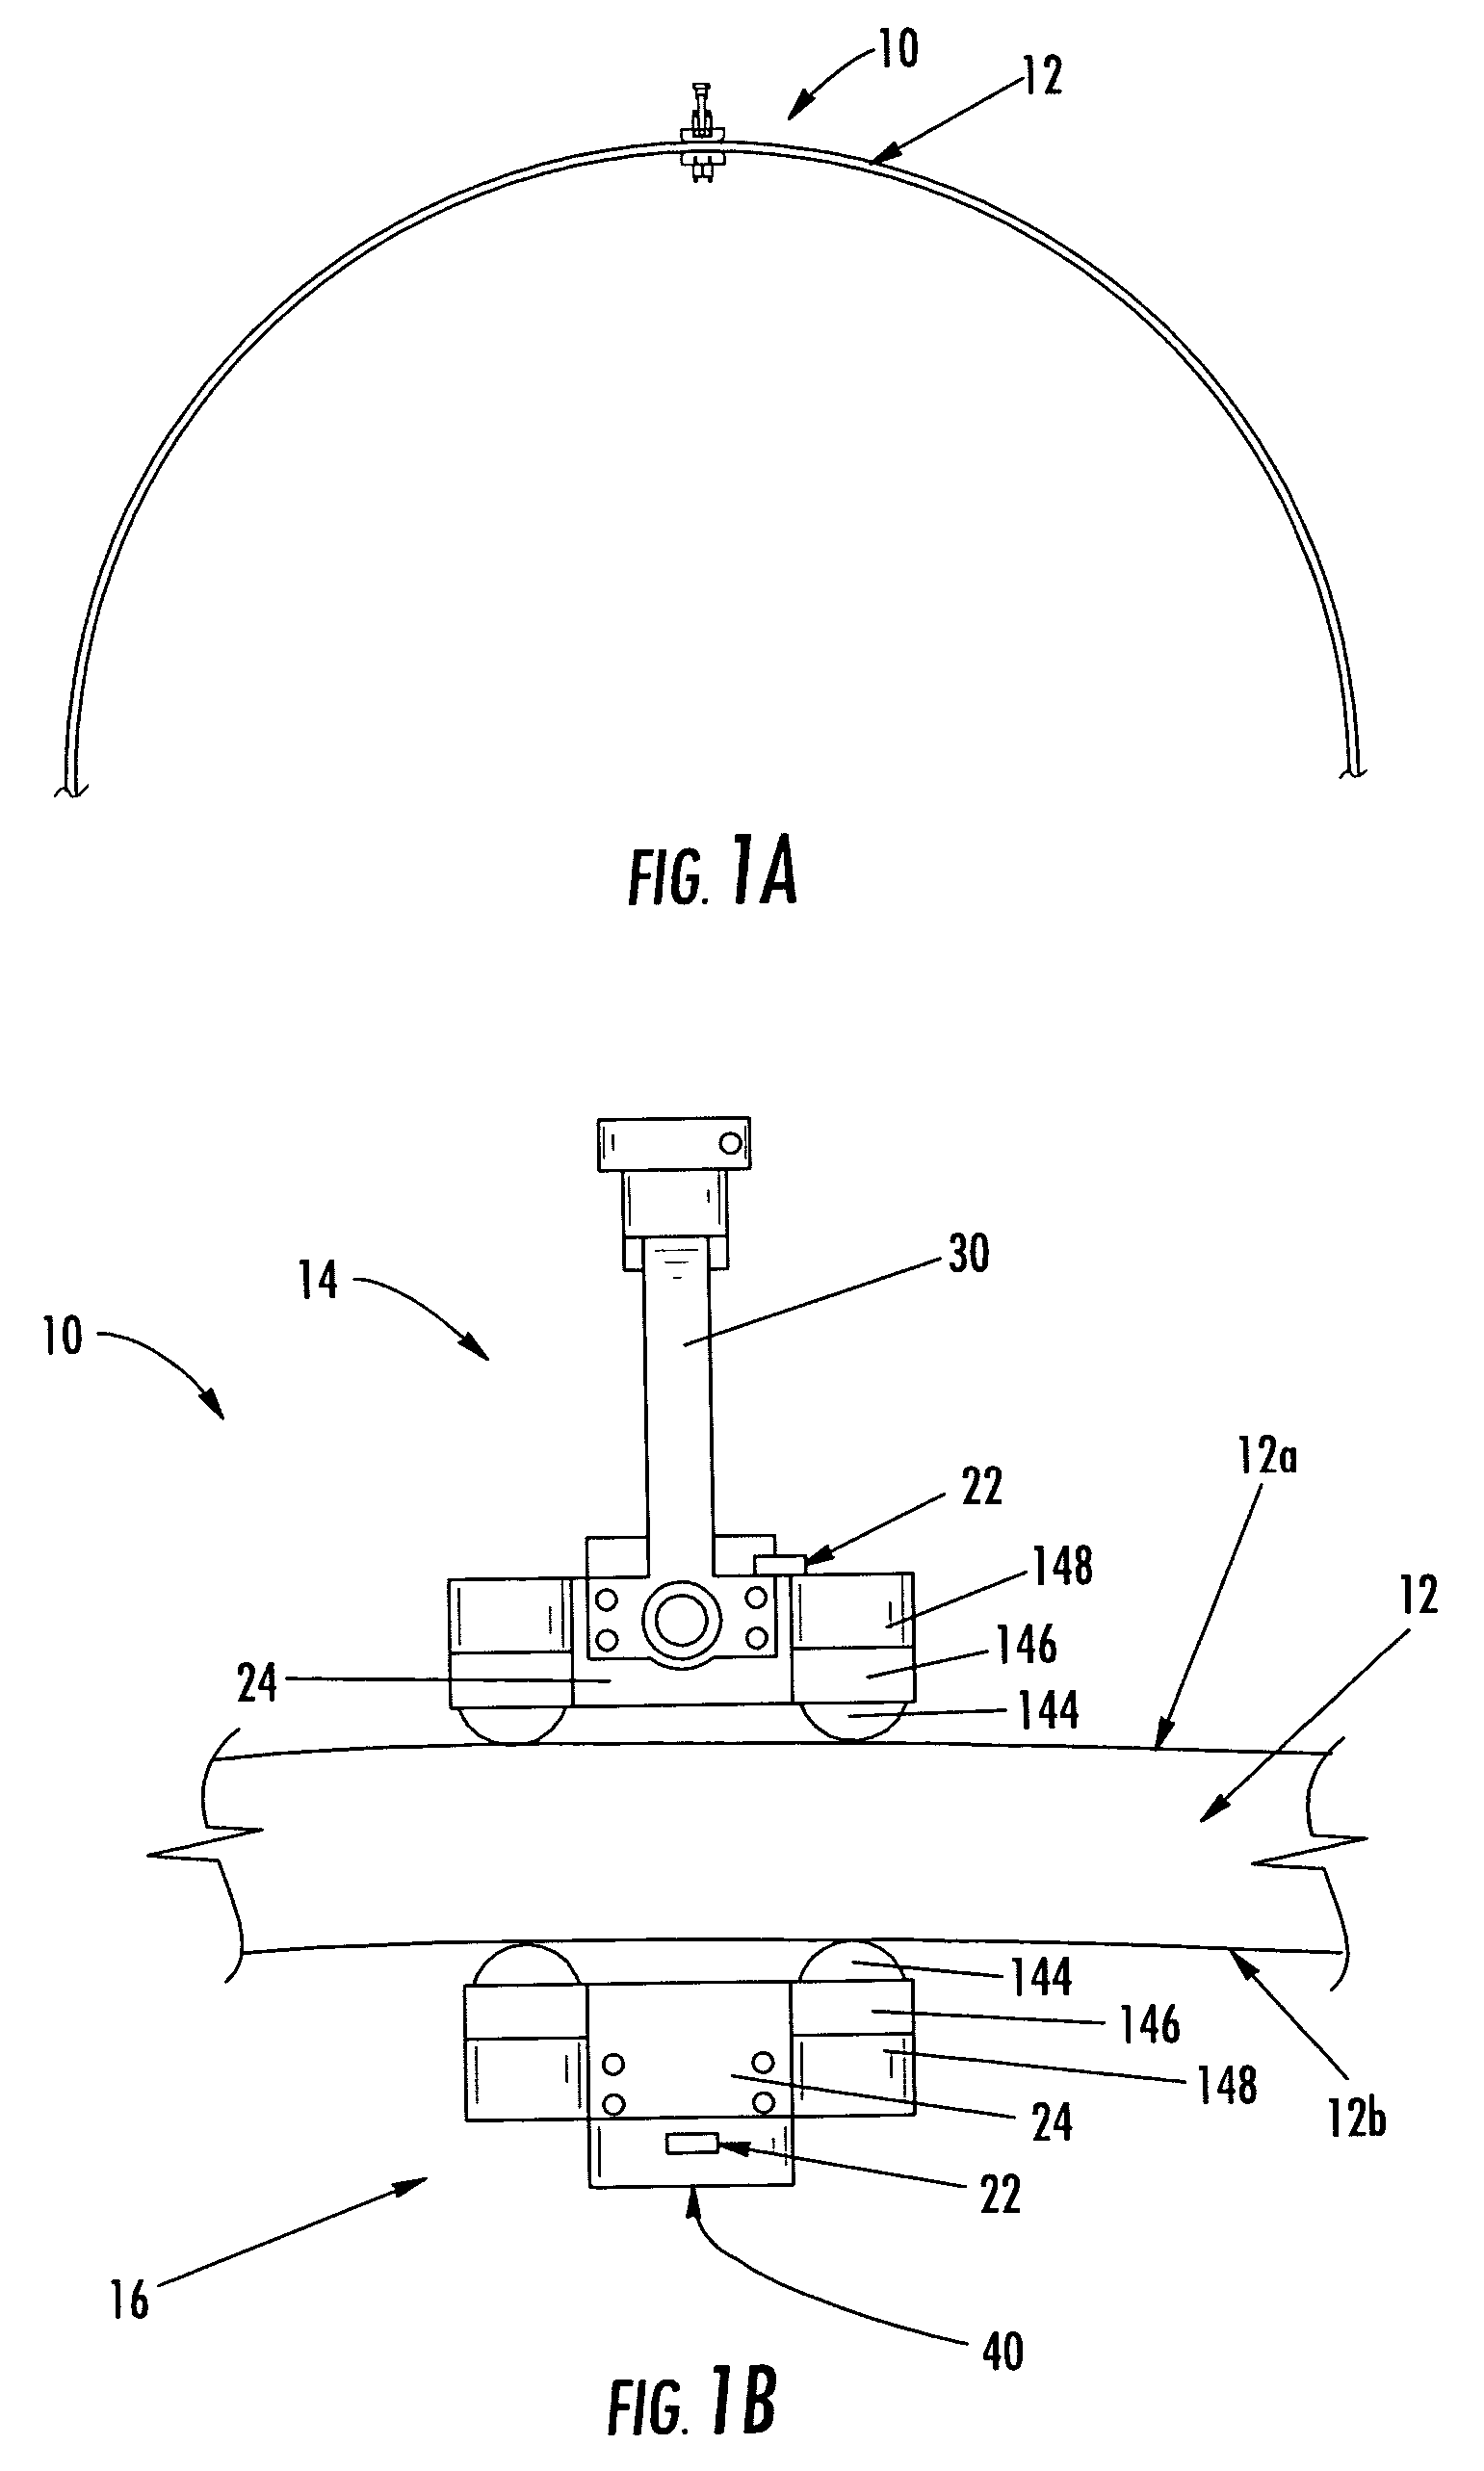 Magnetically attracted inspecting apparatus and method using a ball bearing